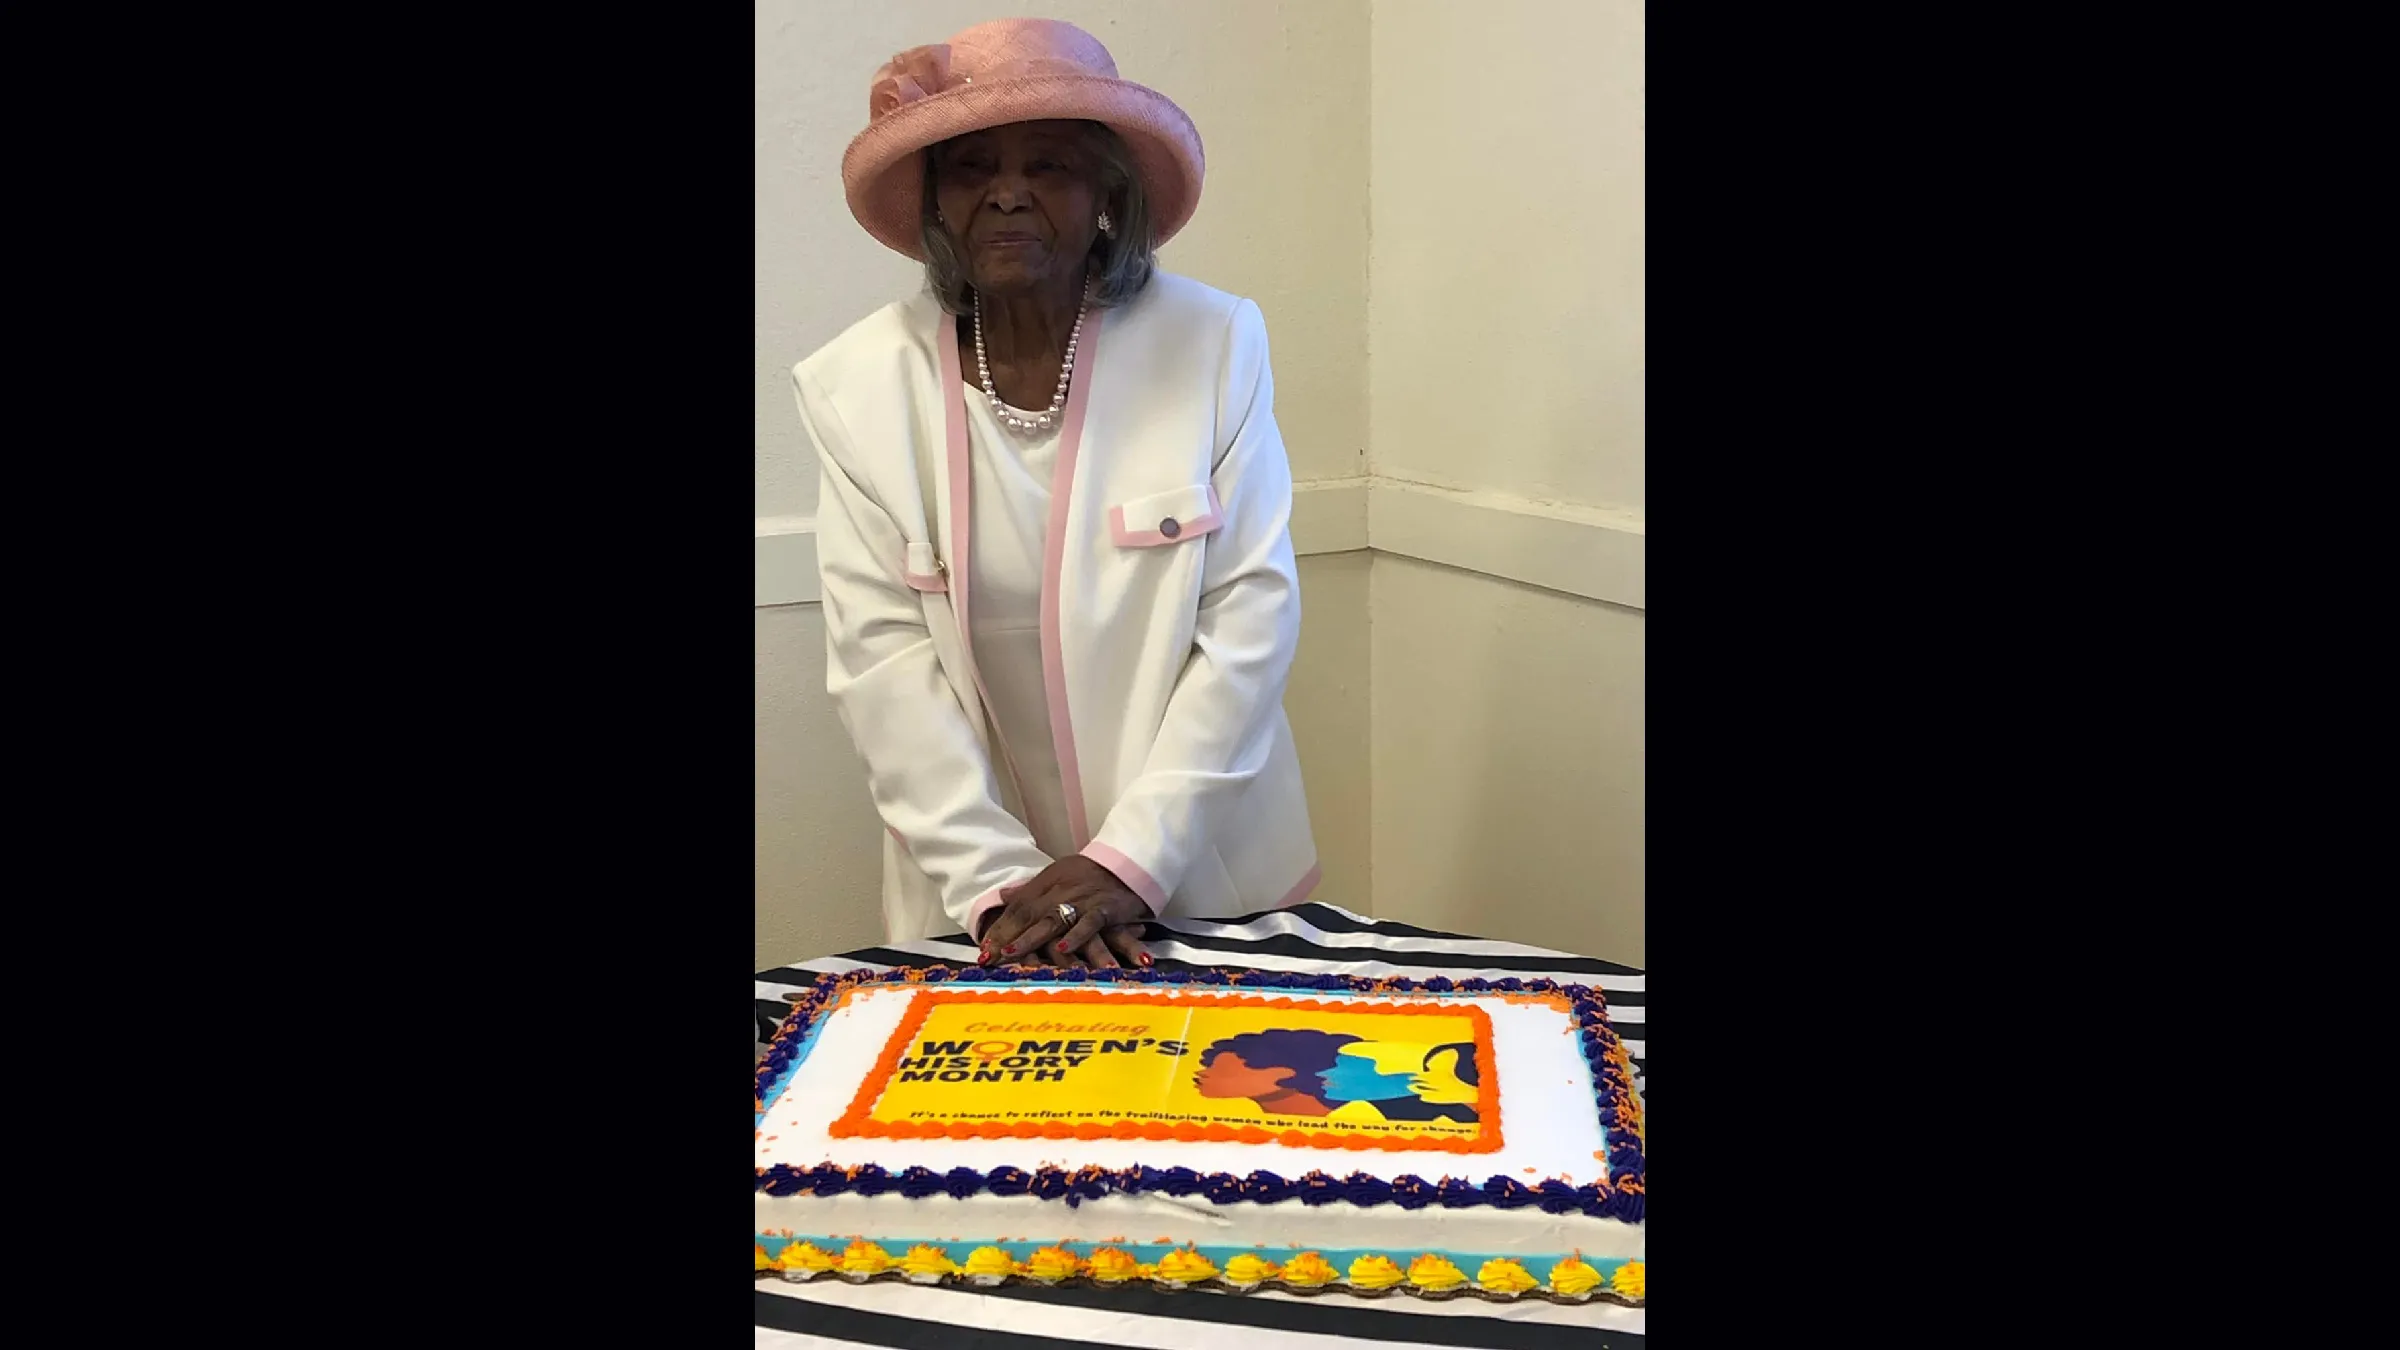 Jewel Collins with cake